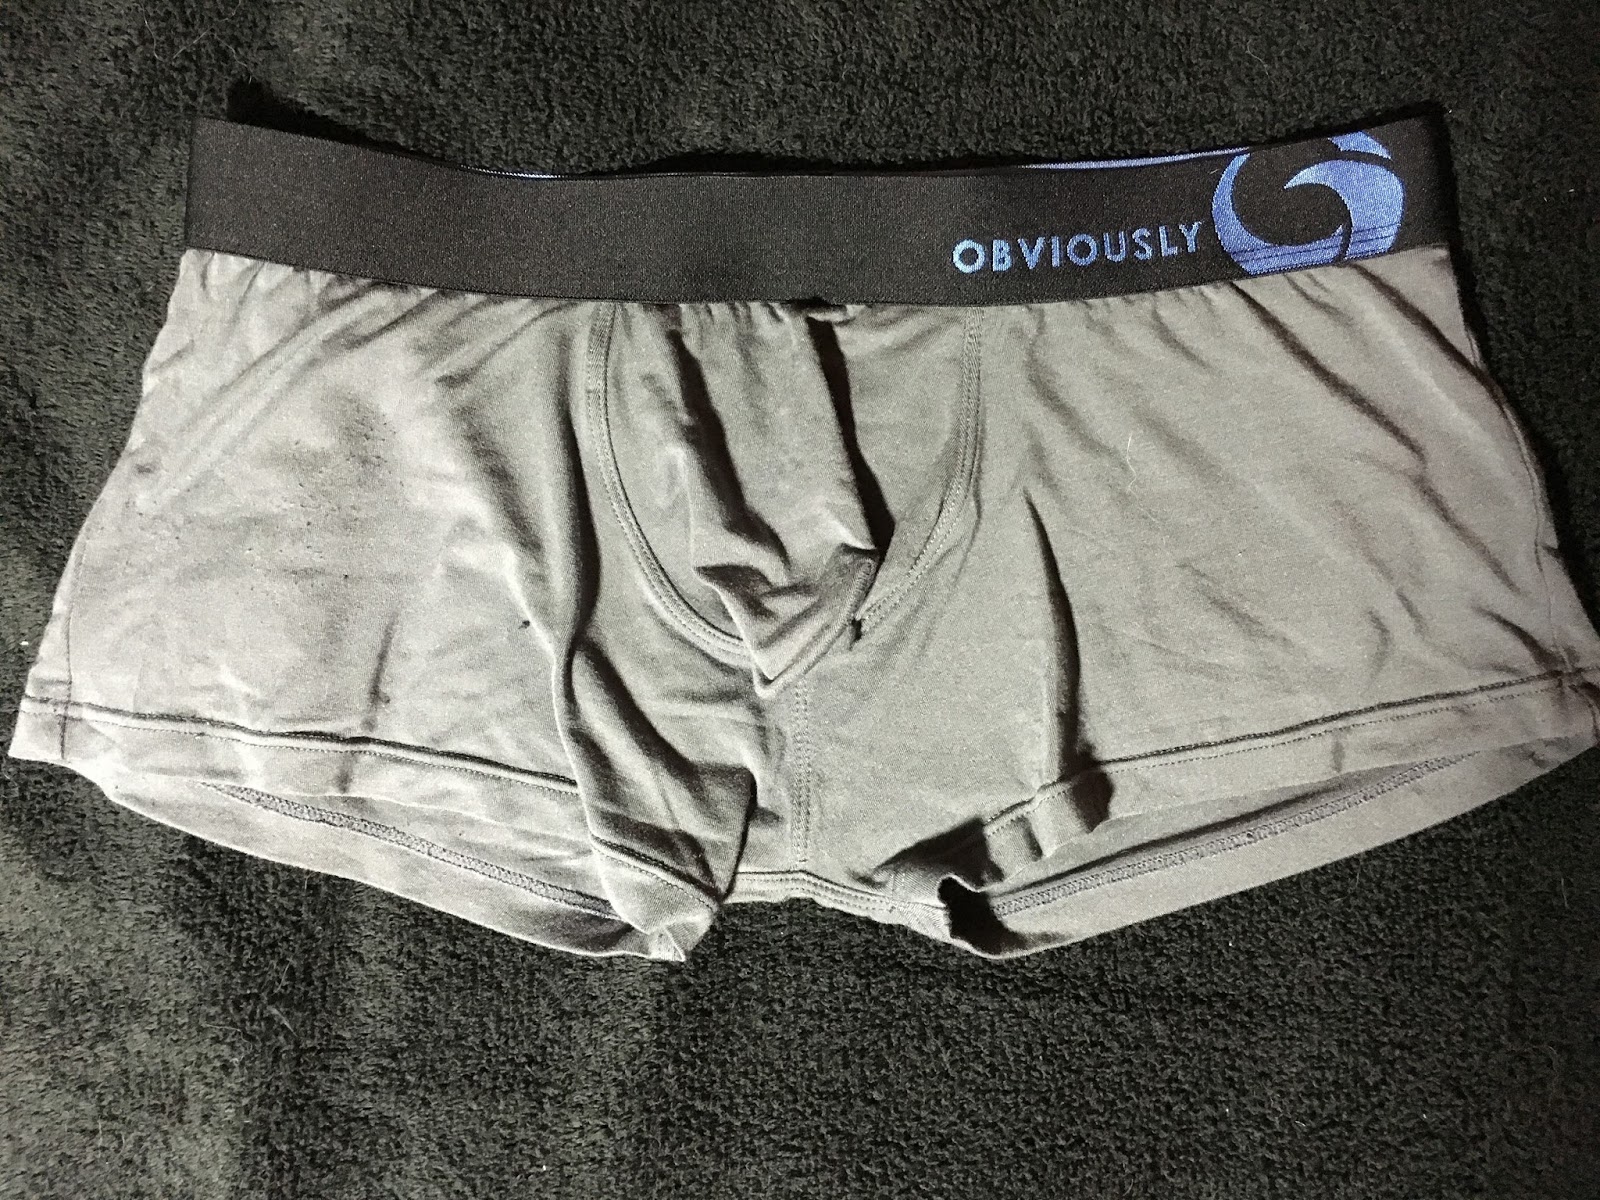 Well-Endowed Underwear Review: Obviously Essence AnatoFREE Hipster Trunk